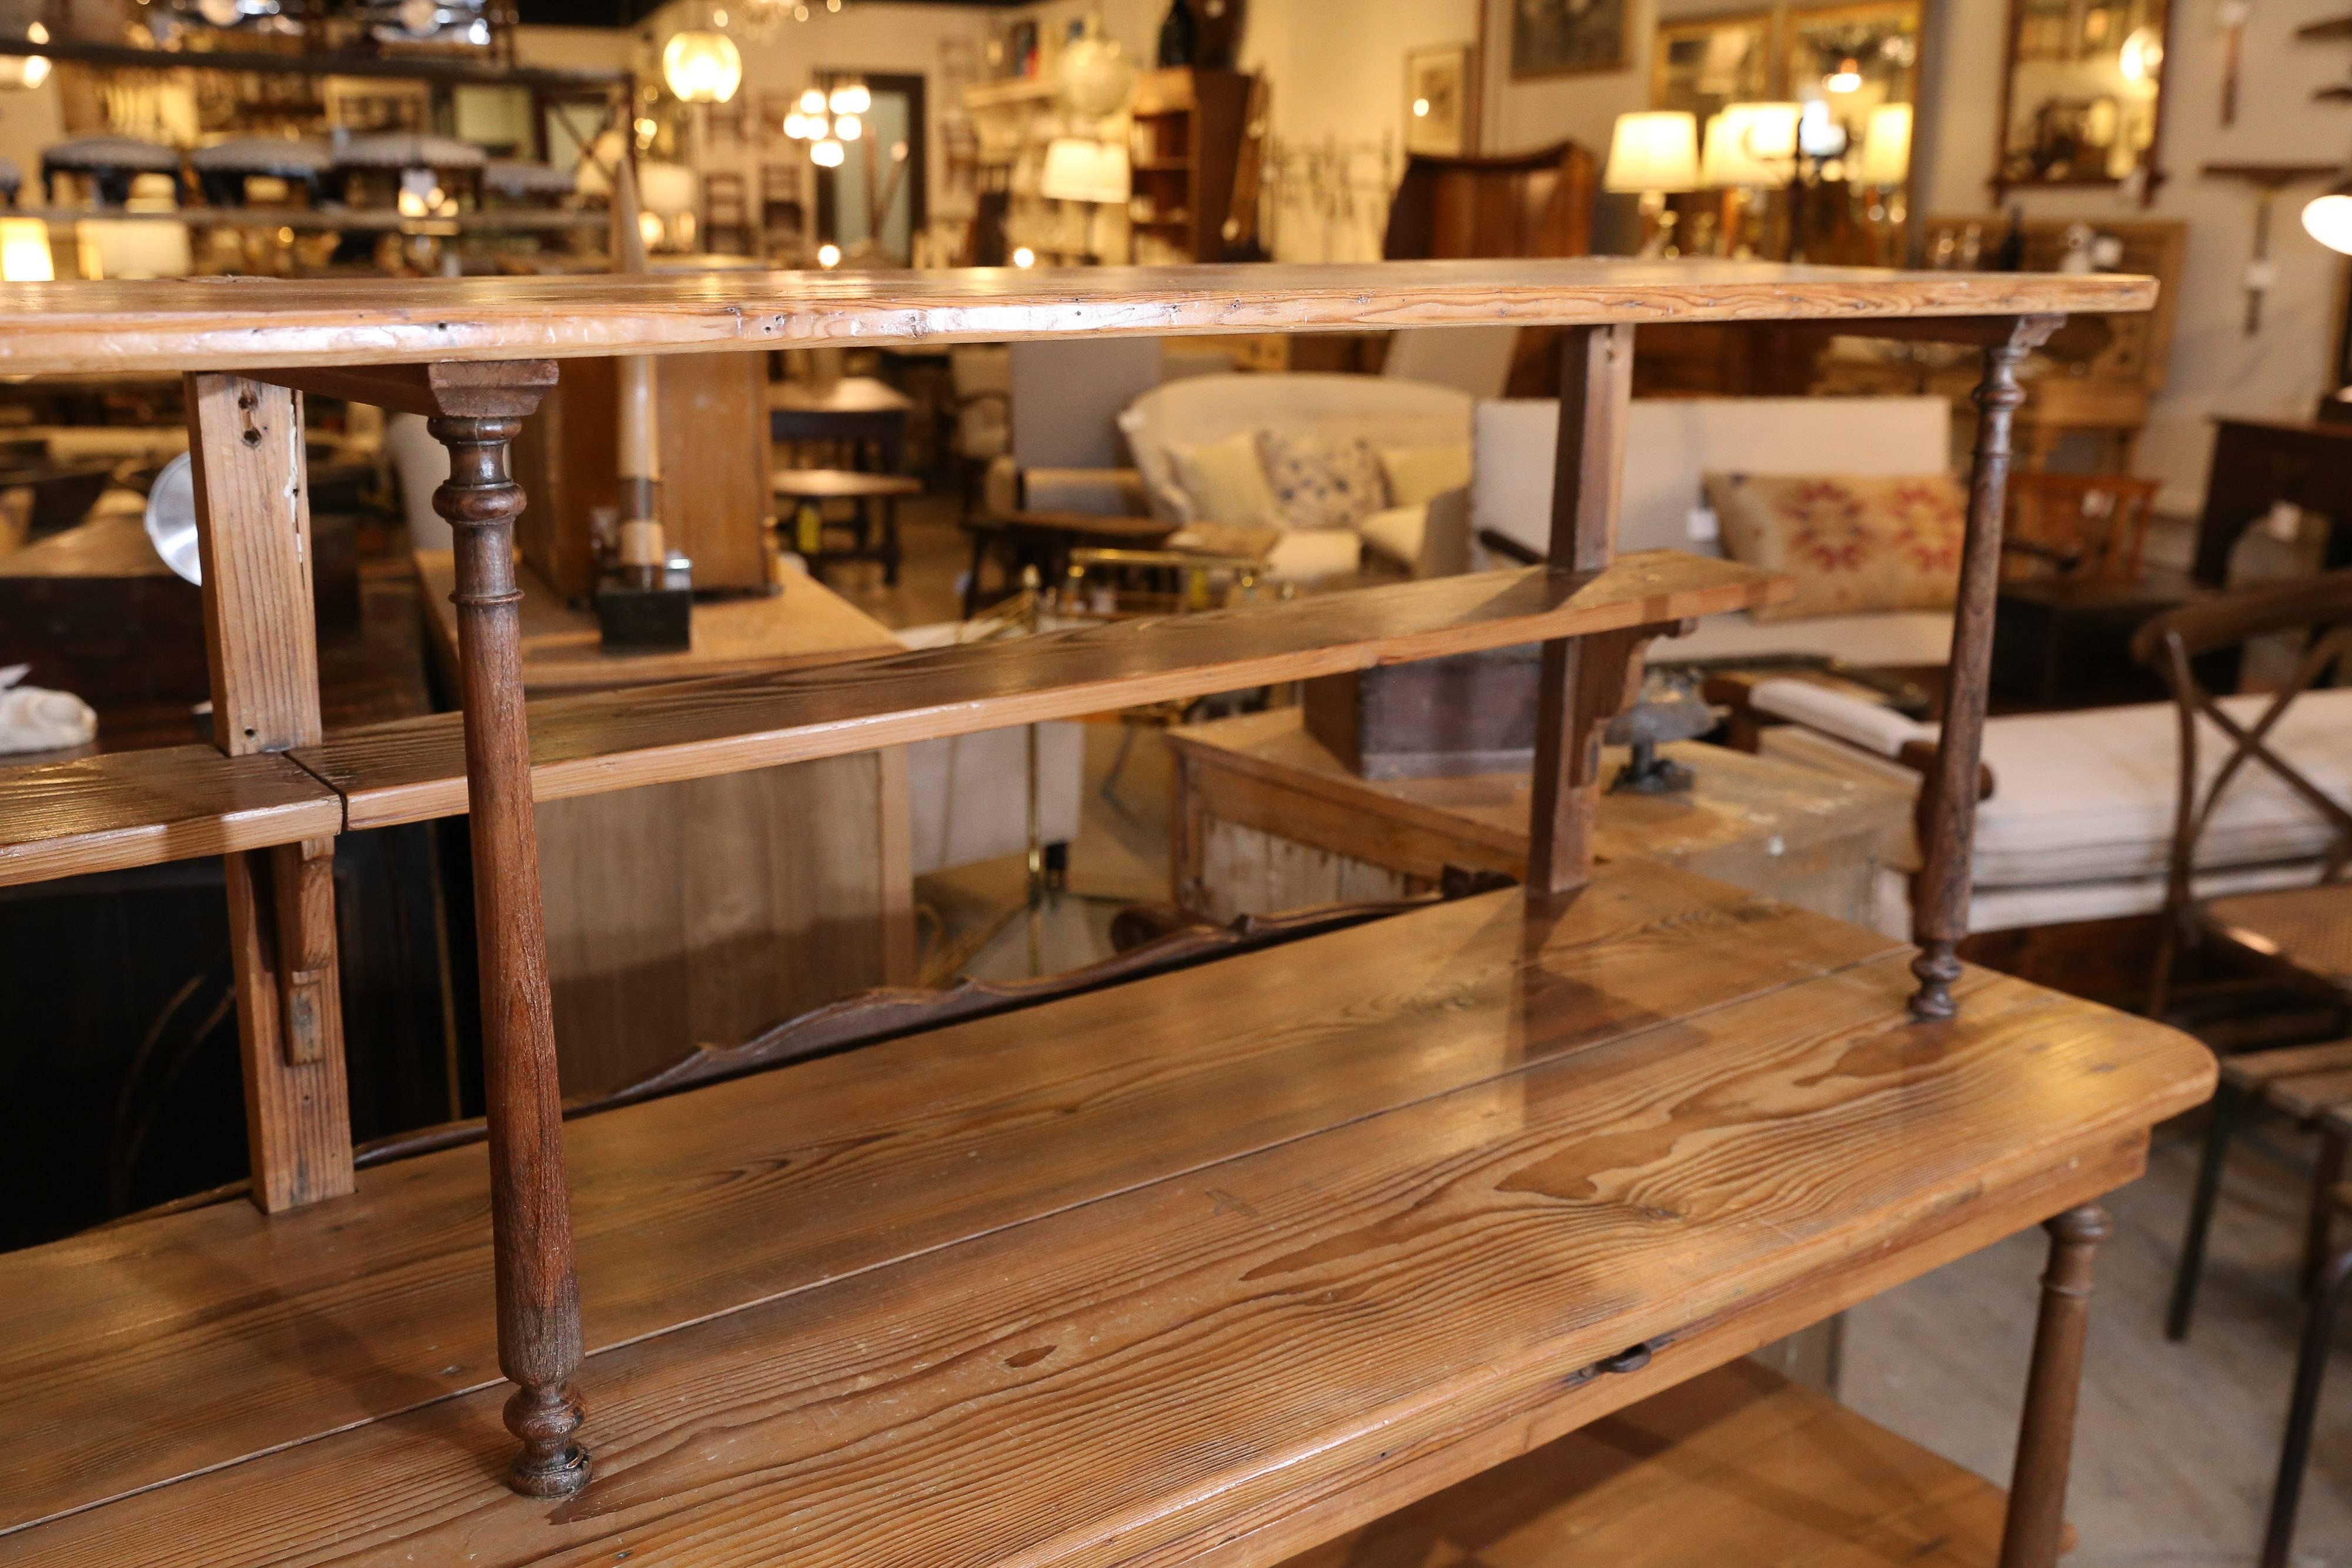 Dating back to the 1800s, this outstanding patisserie shelf from France is an exceptional find. Solid and sturdy with four full shelves, one small half-shelf, and an additional 35 inch pull-out. Void of decoration with the exception of the turned